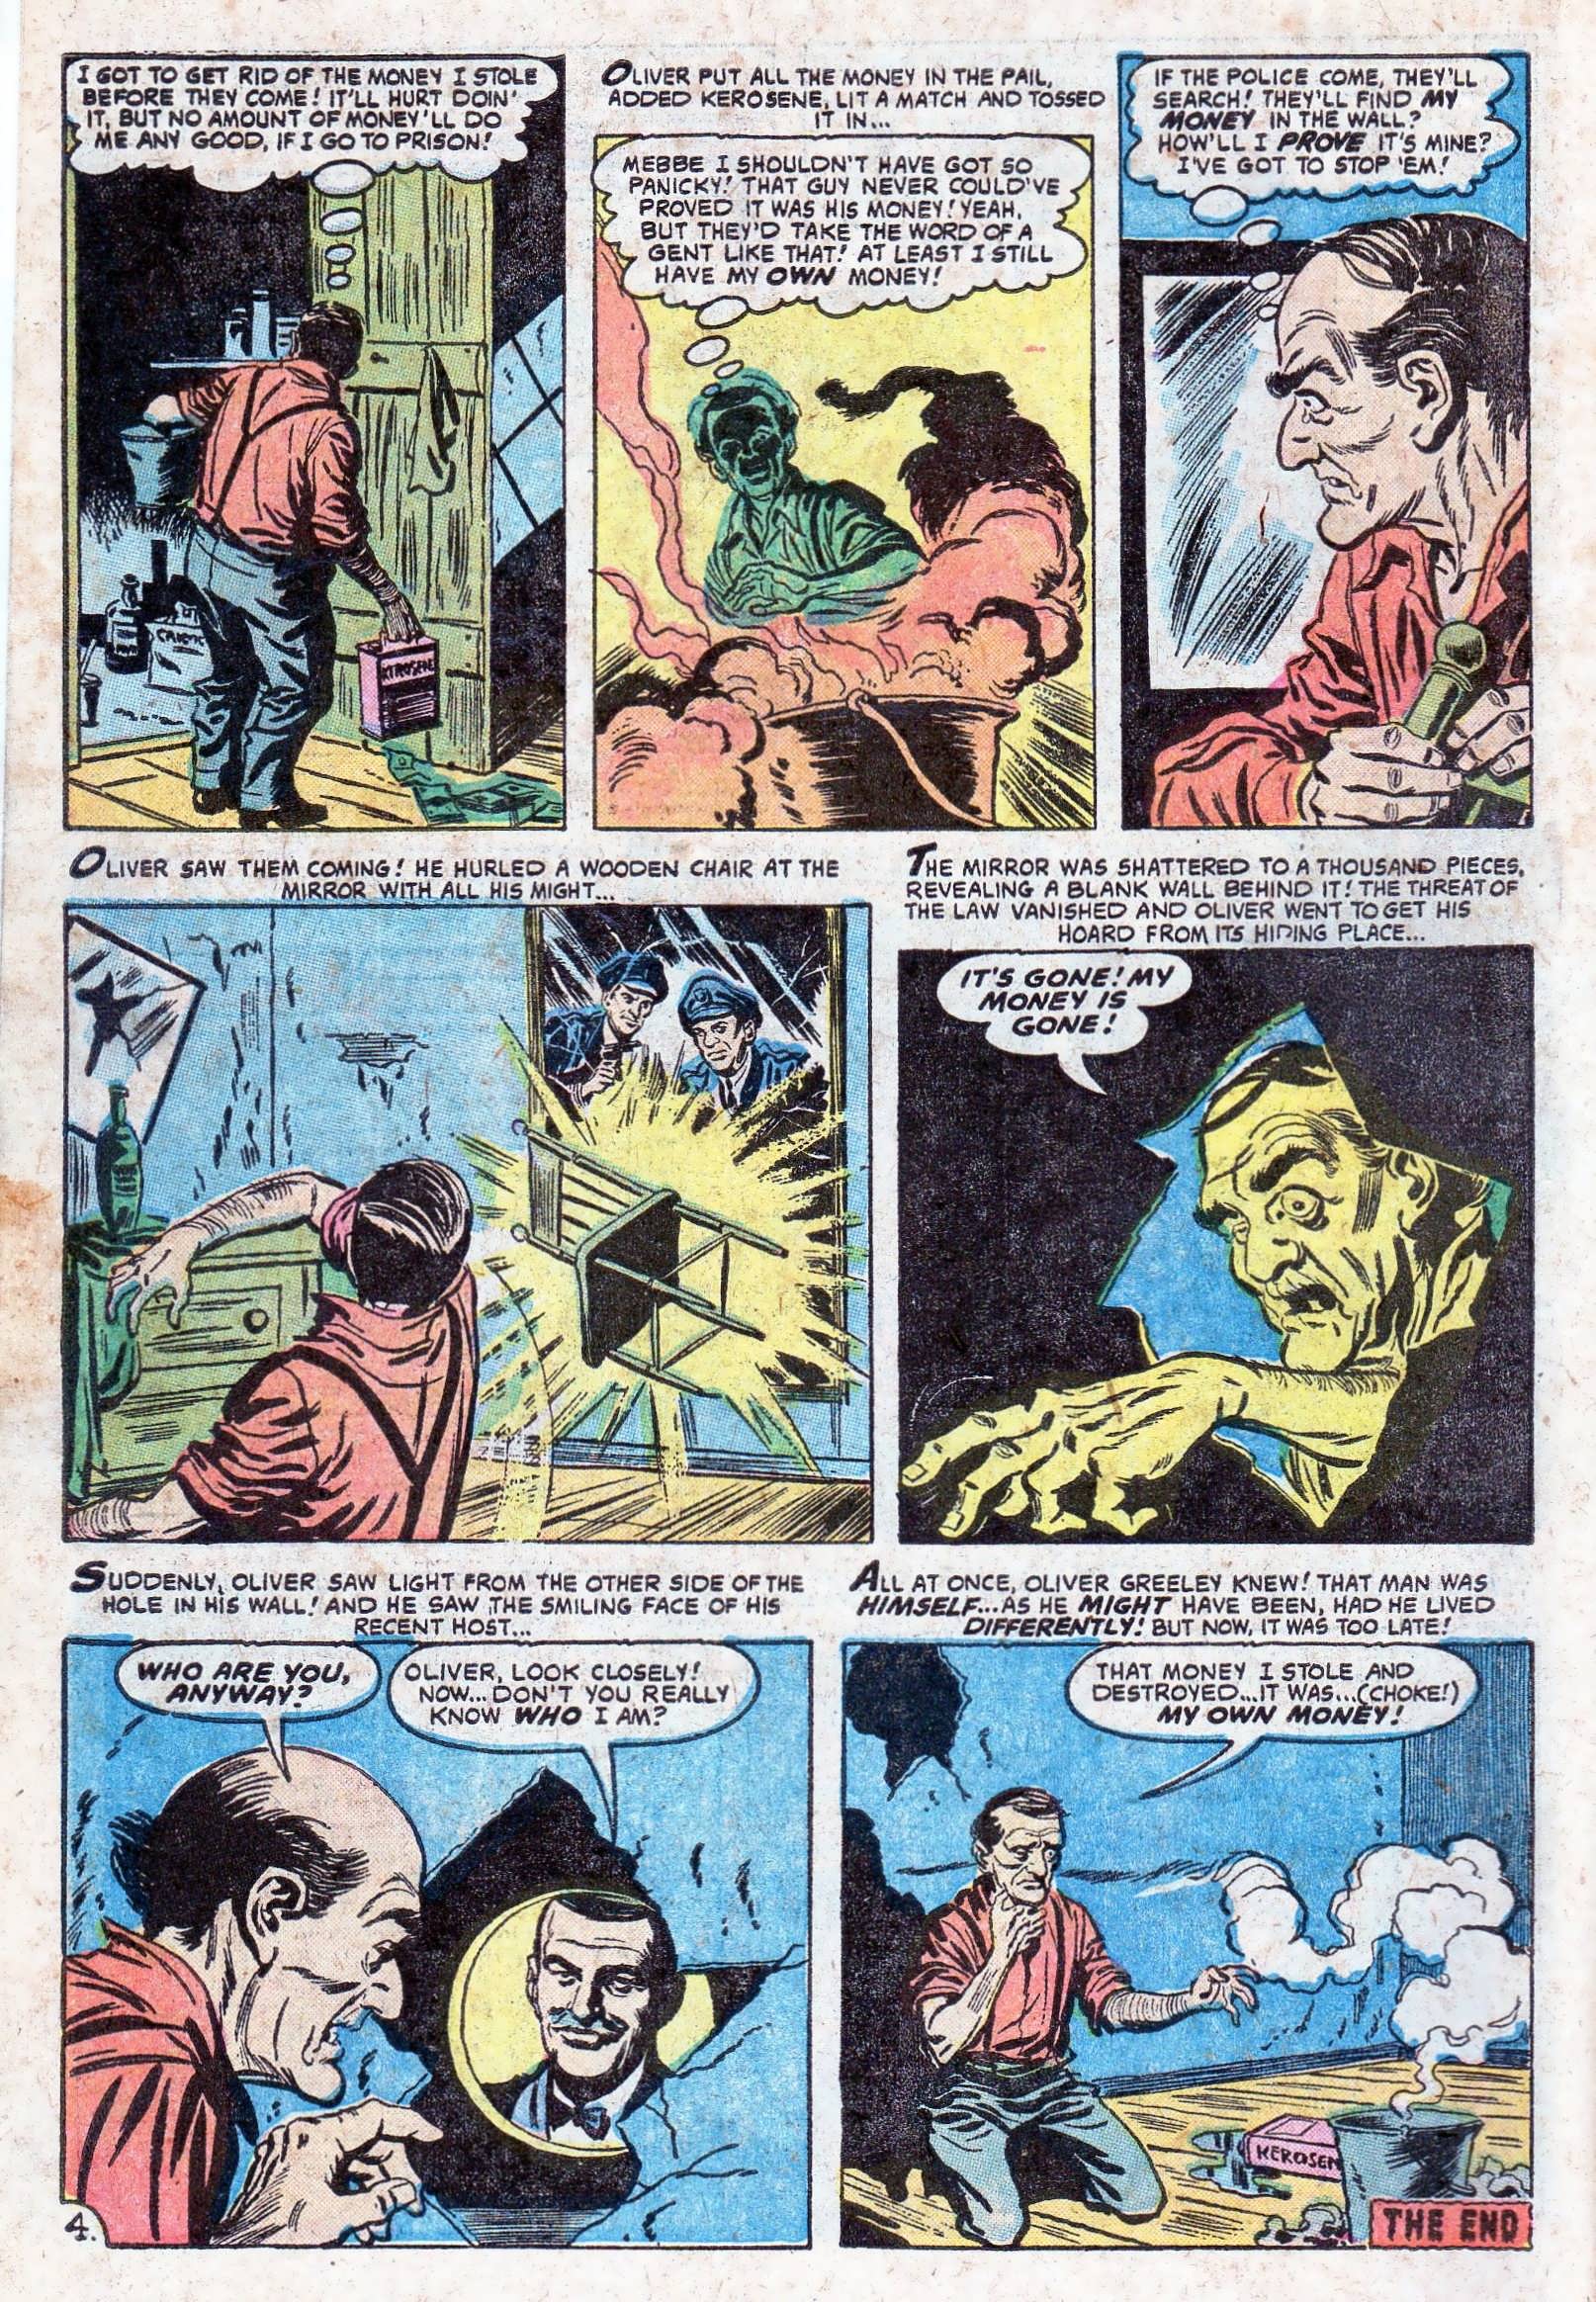 Marvel Tales (1949) 155 Page 5